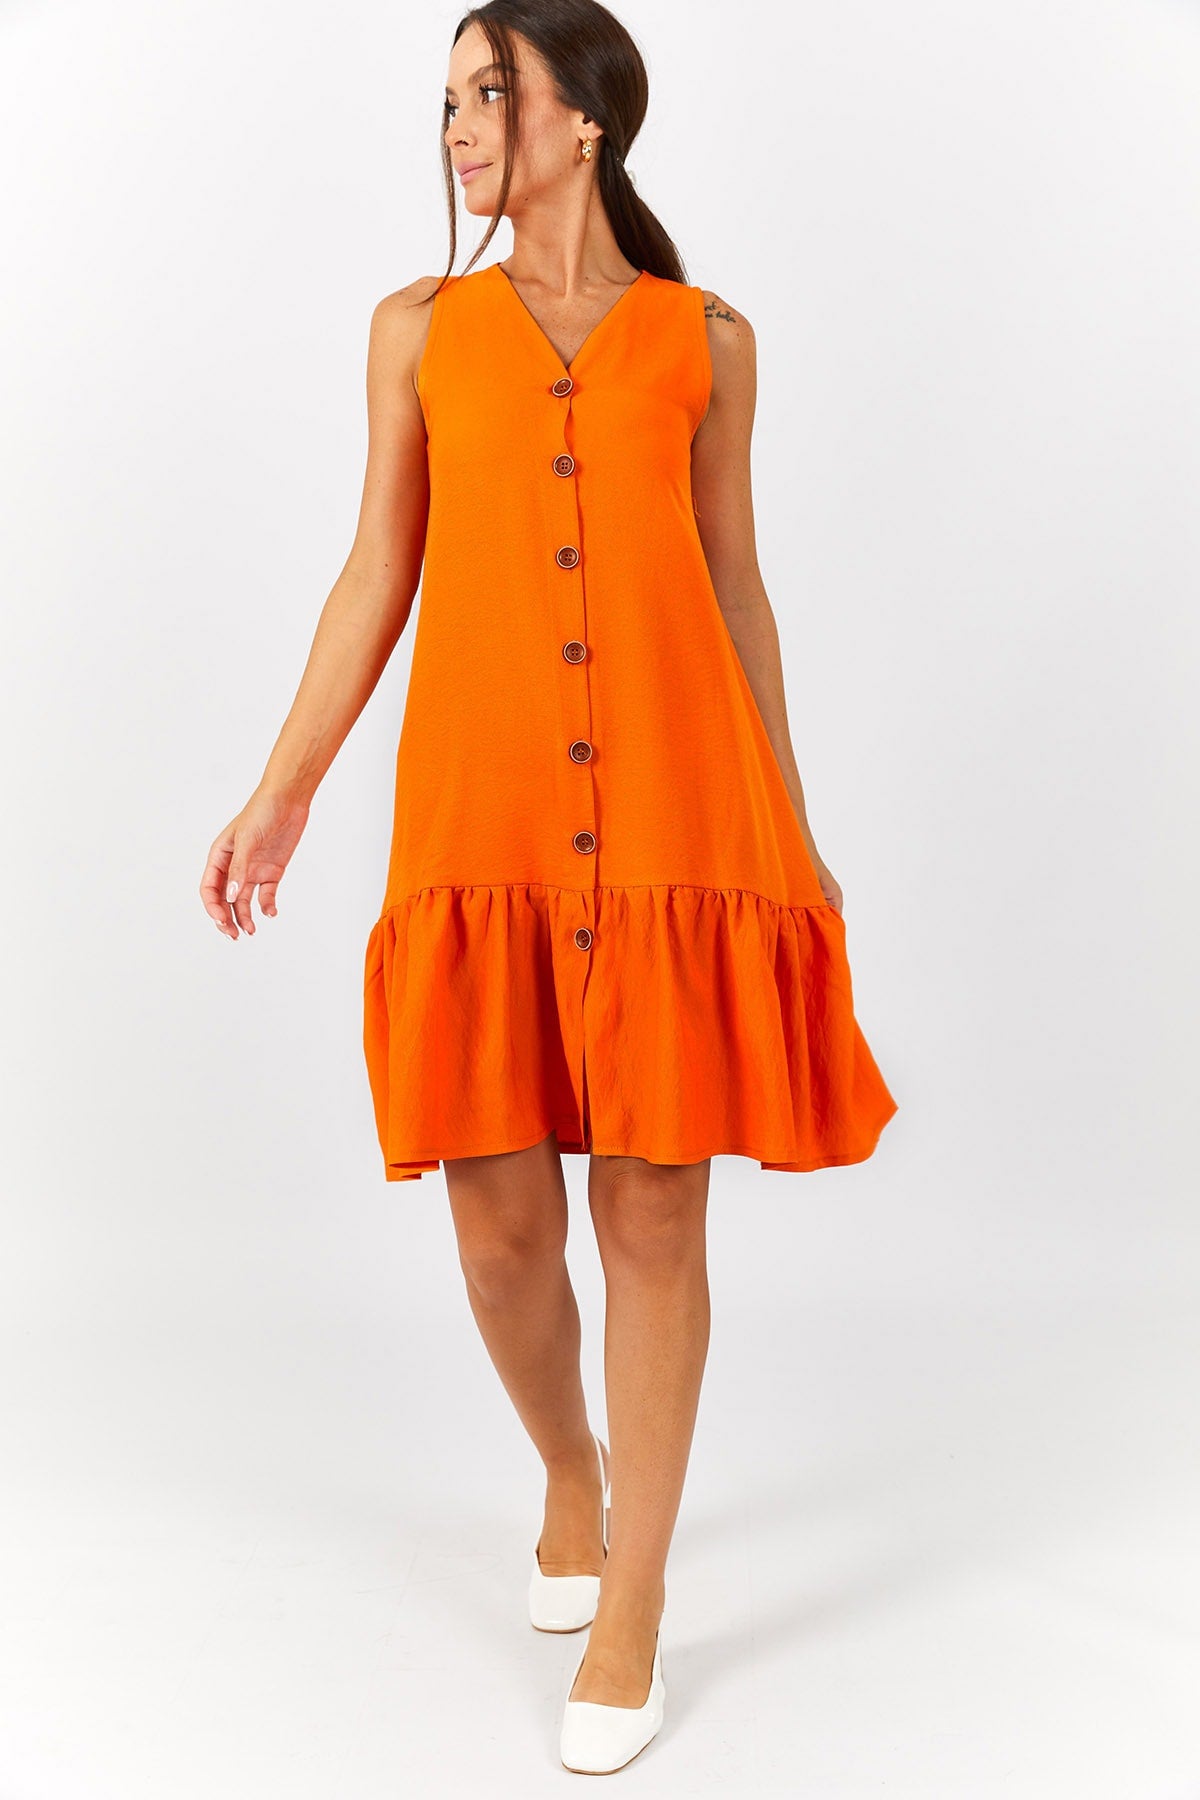 Women's Orange Skirt with frilly buttoned sleeveless dress ARM-221153